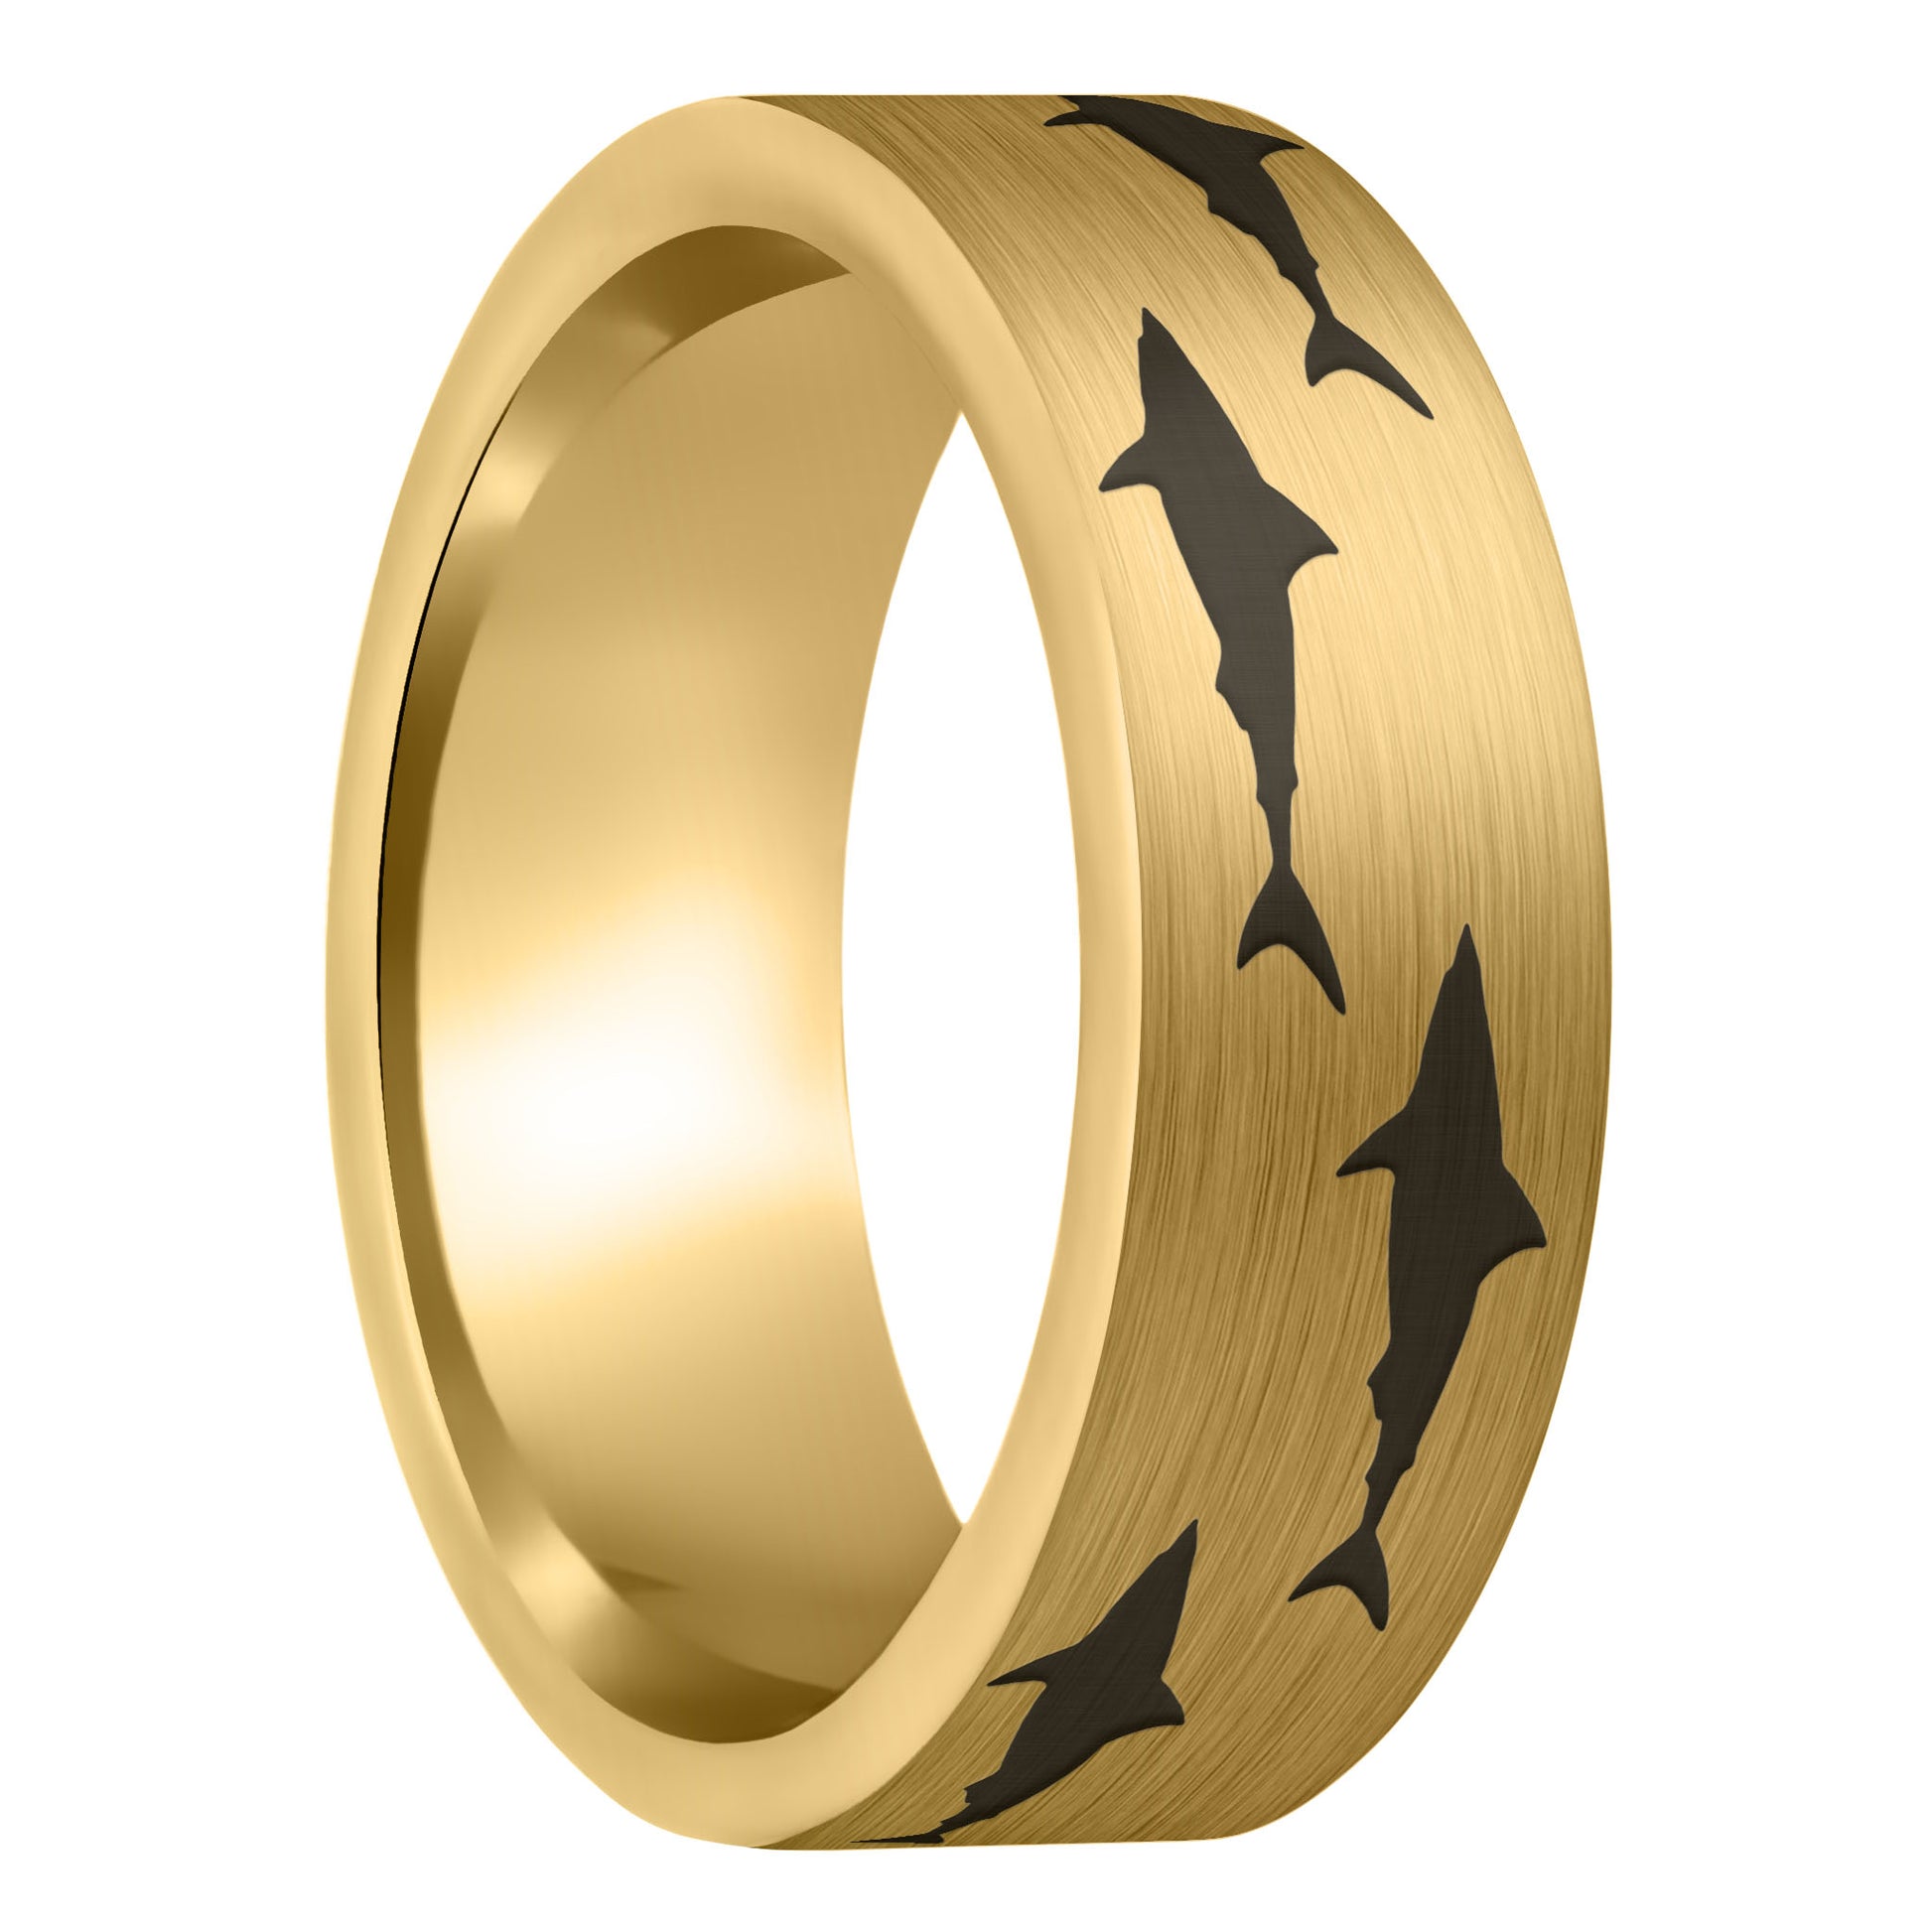 A shark brushed gold tungsten men's wedding band displayed on a plain white background.